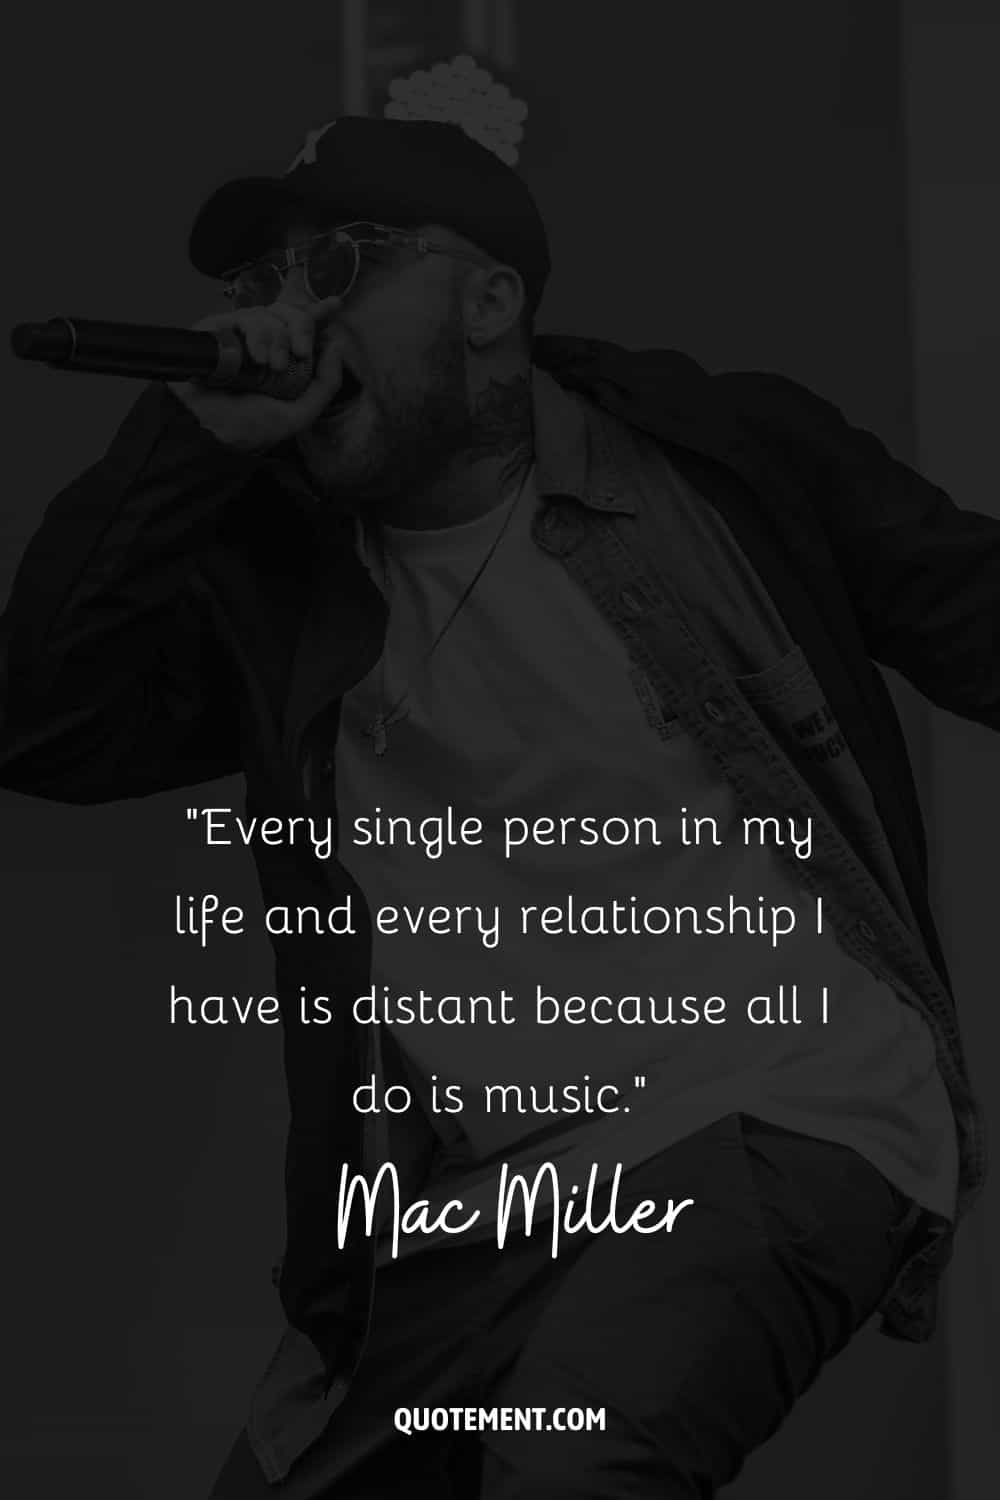 “Every single person in my life and every relationship I have is distant because all I do is music.” – Mac Miller